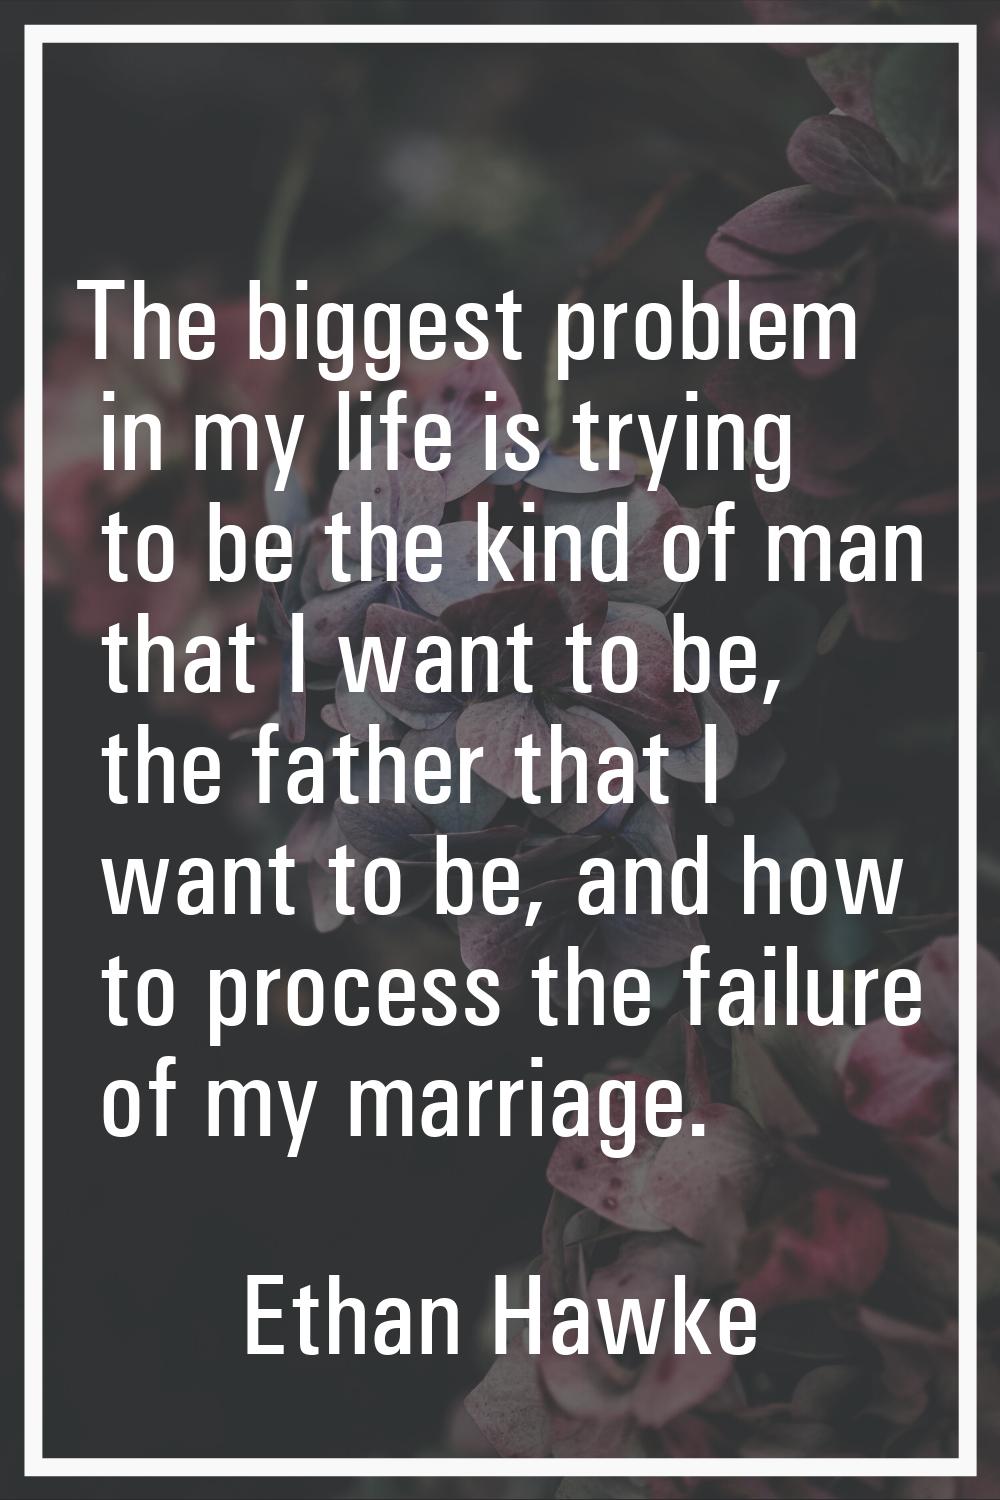 The biggest problem in my life is trying to be the kind of man that I want to be, the father that I